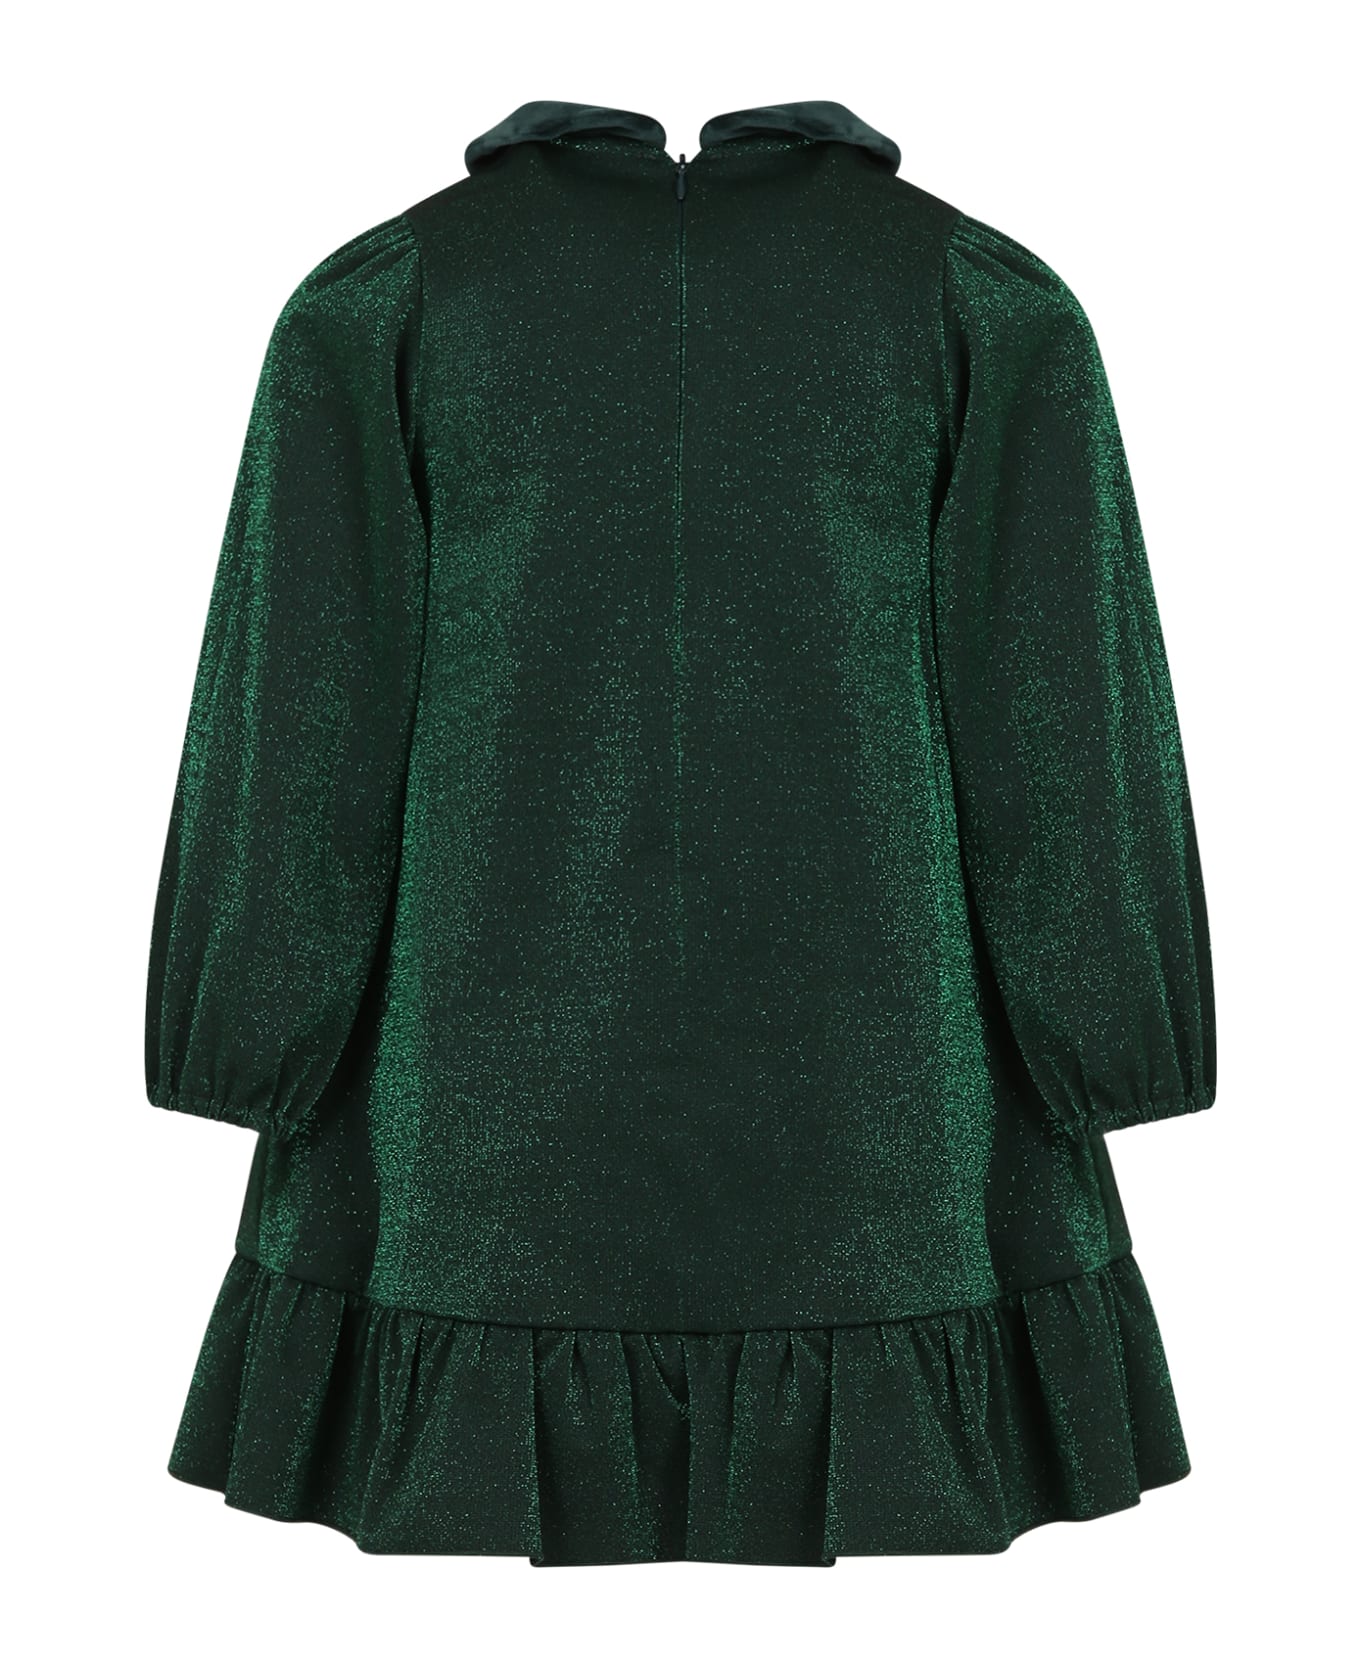 La stupenderia Green Dress For Girl With Bow - Green